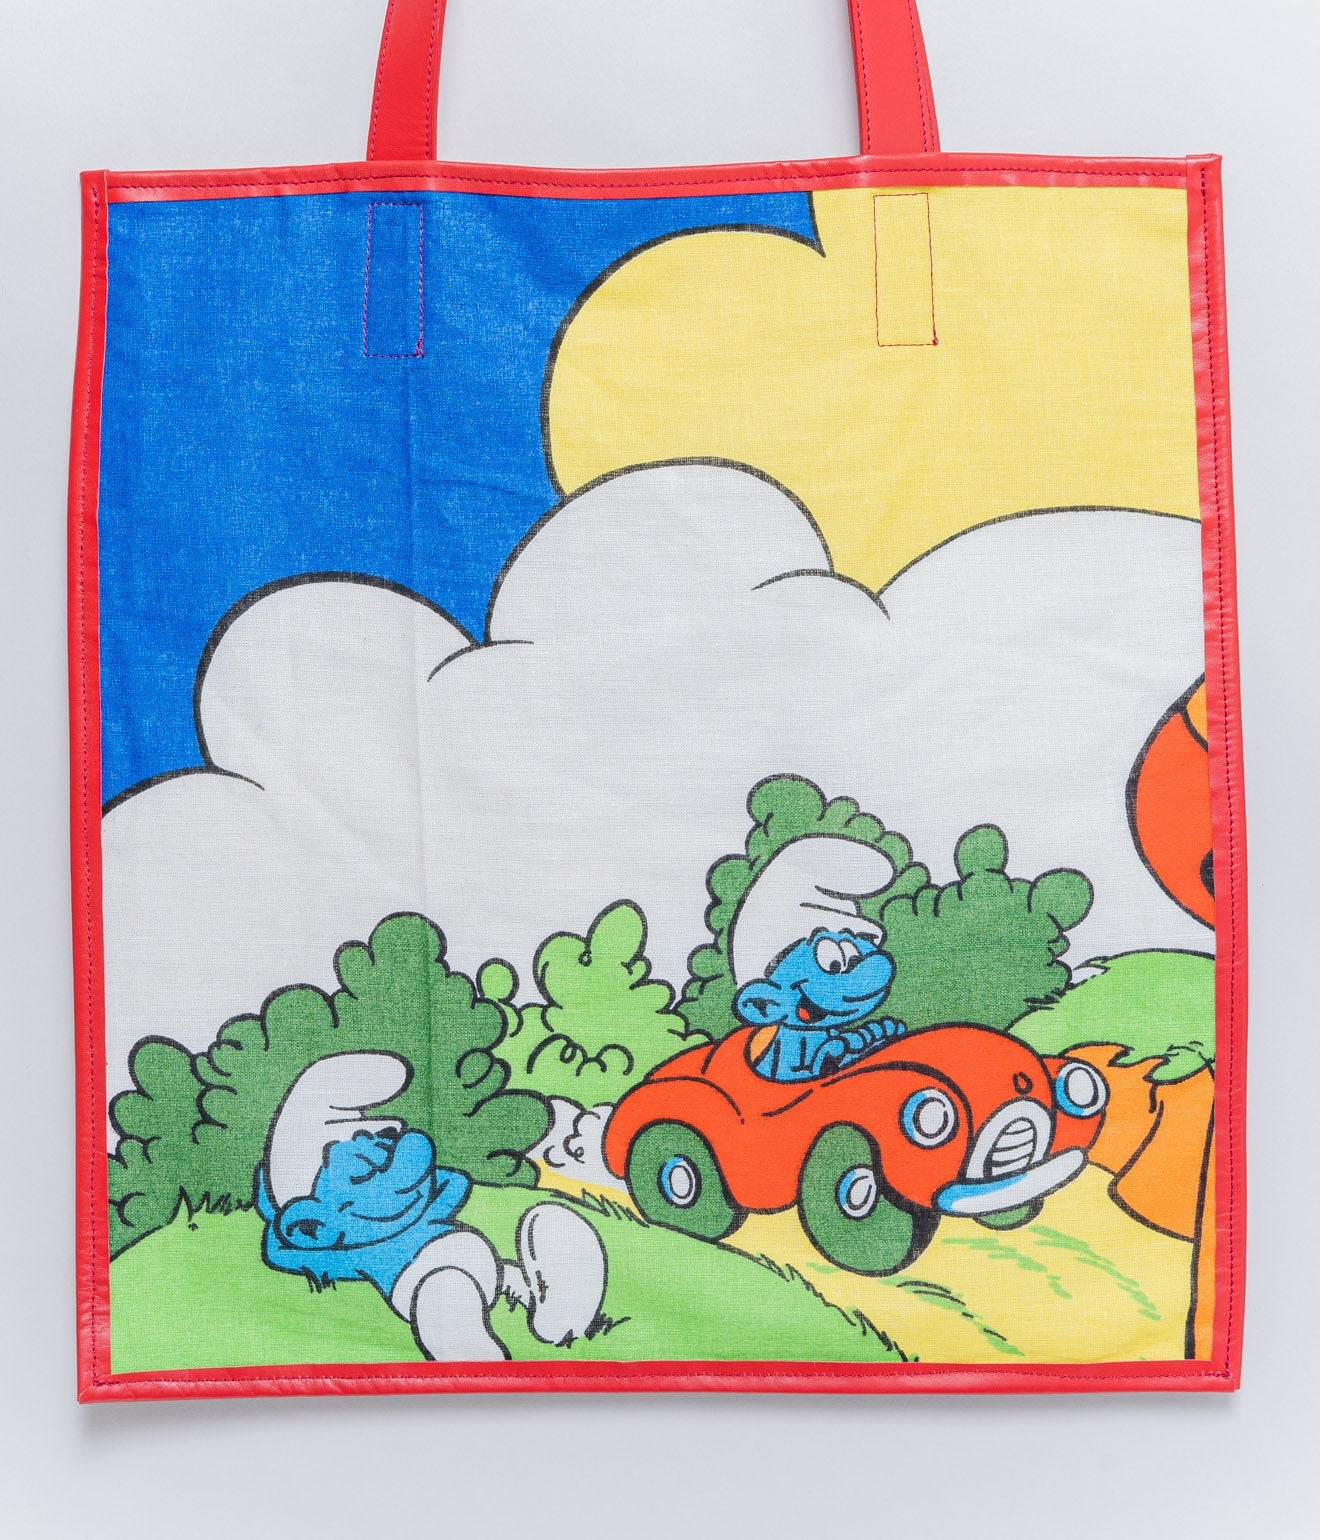 WEAREALLANIMALS UPCYCLE ”Piping Flat Tote -Vintage Smurf Fabric-" #9 - WEAREALLANIMALS